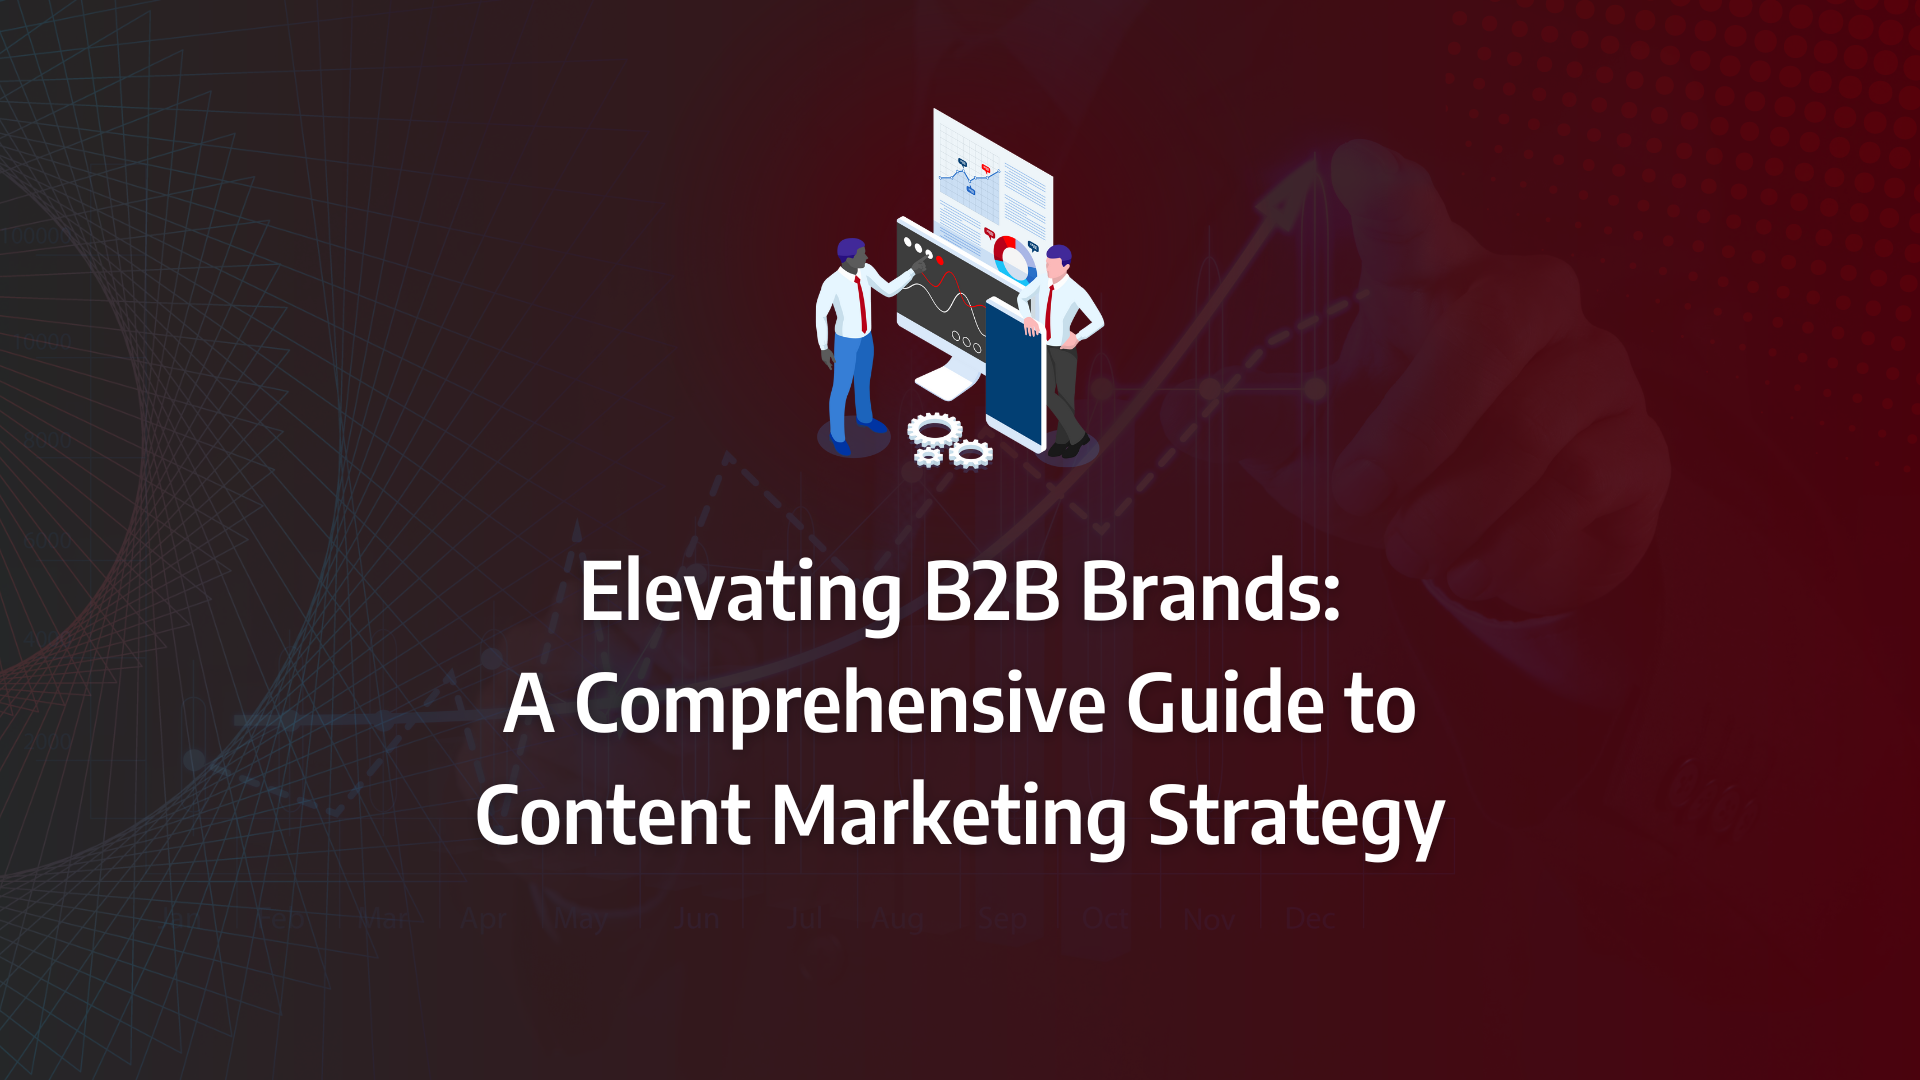 the ultimate guide to b2b content marketing strategy incorporating content marketing, thought-leadership, content creation, brand awareness, content planning